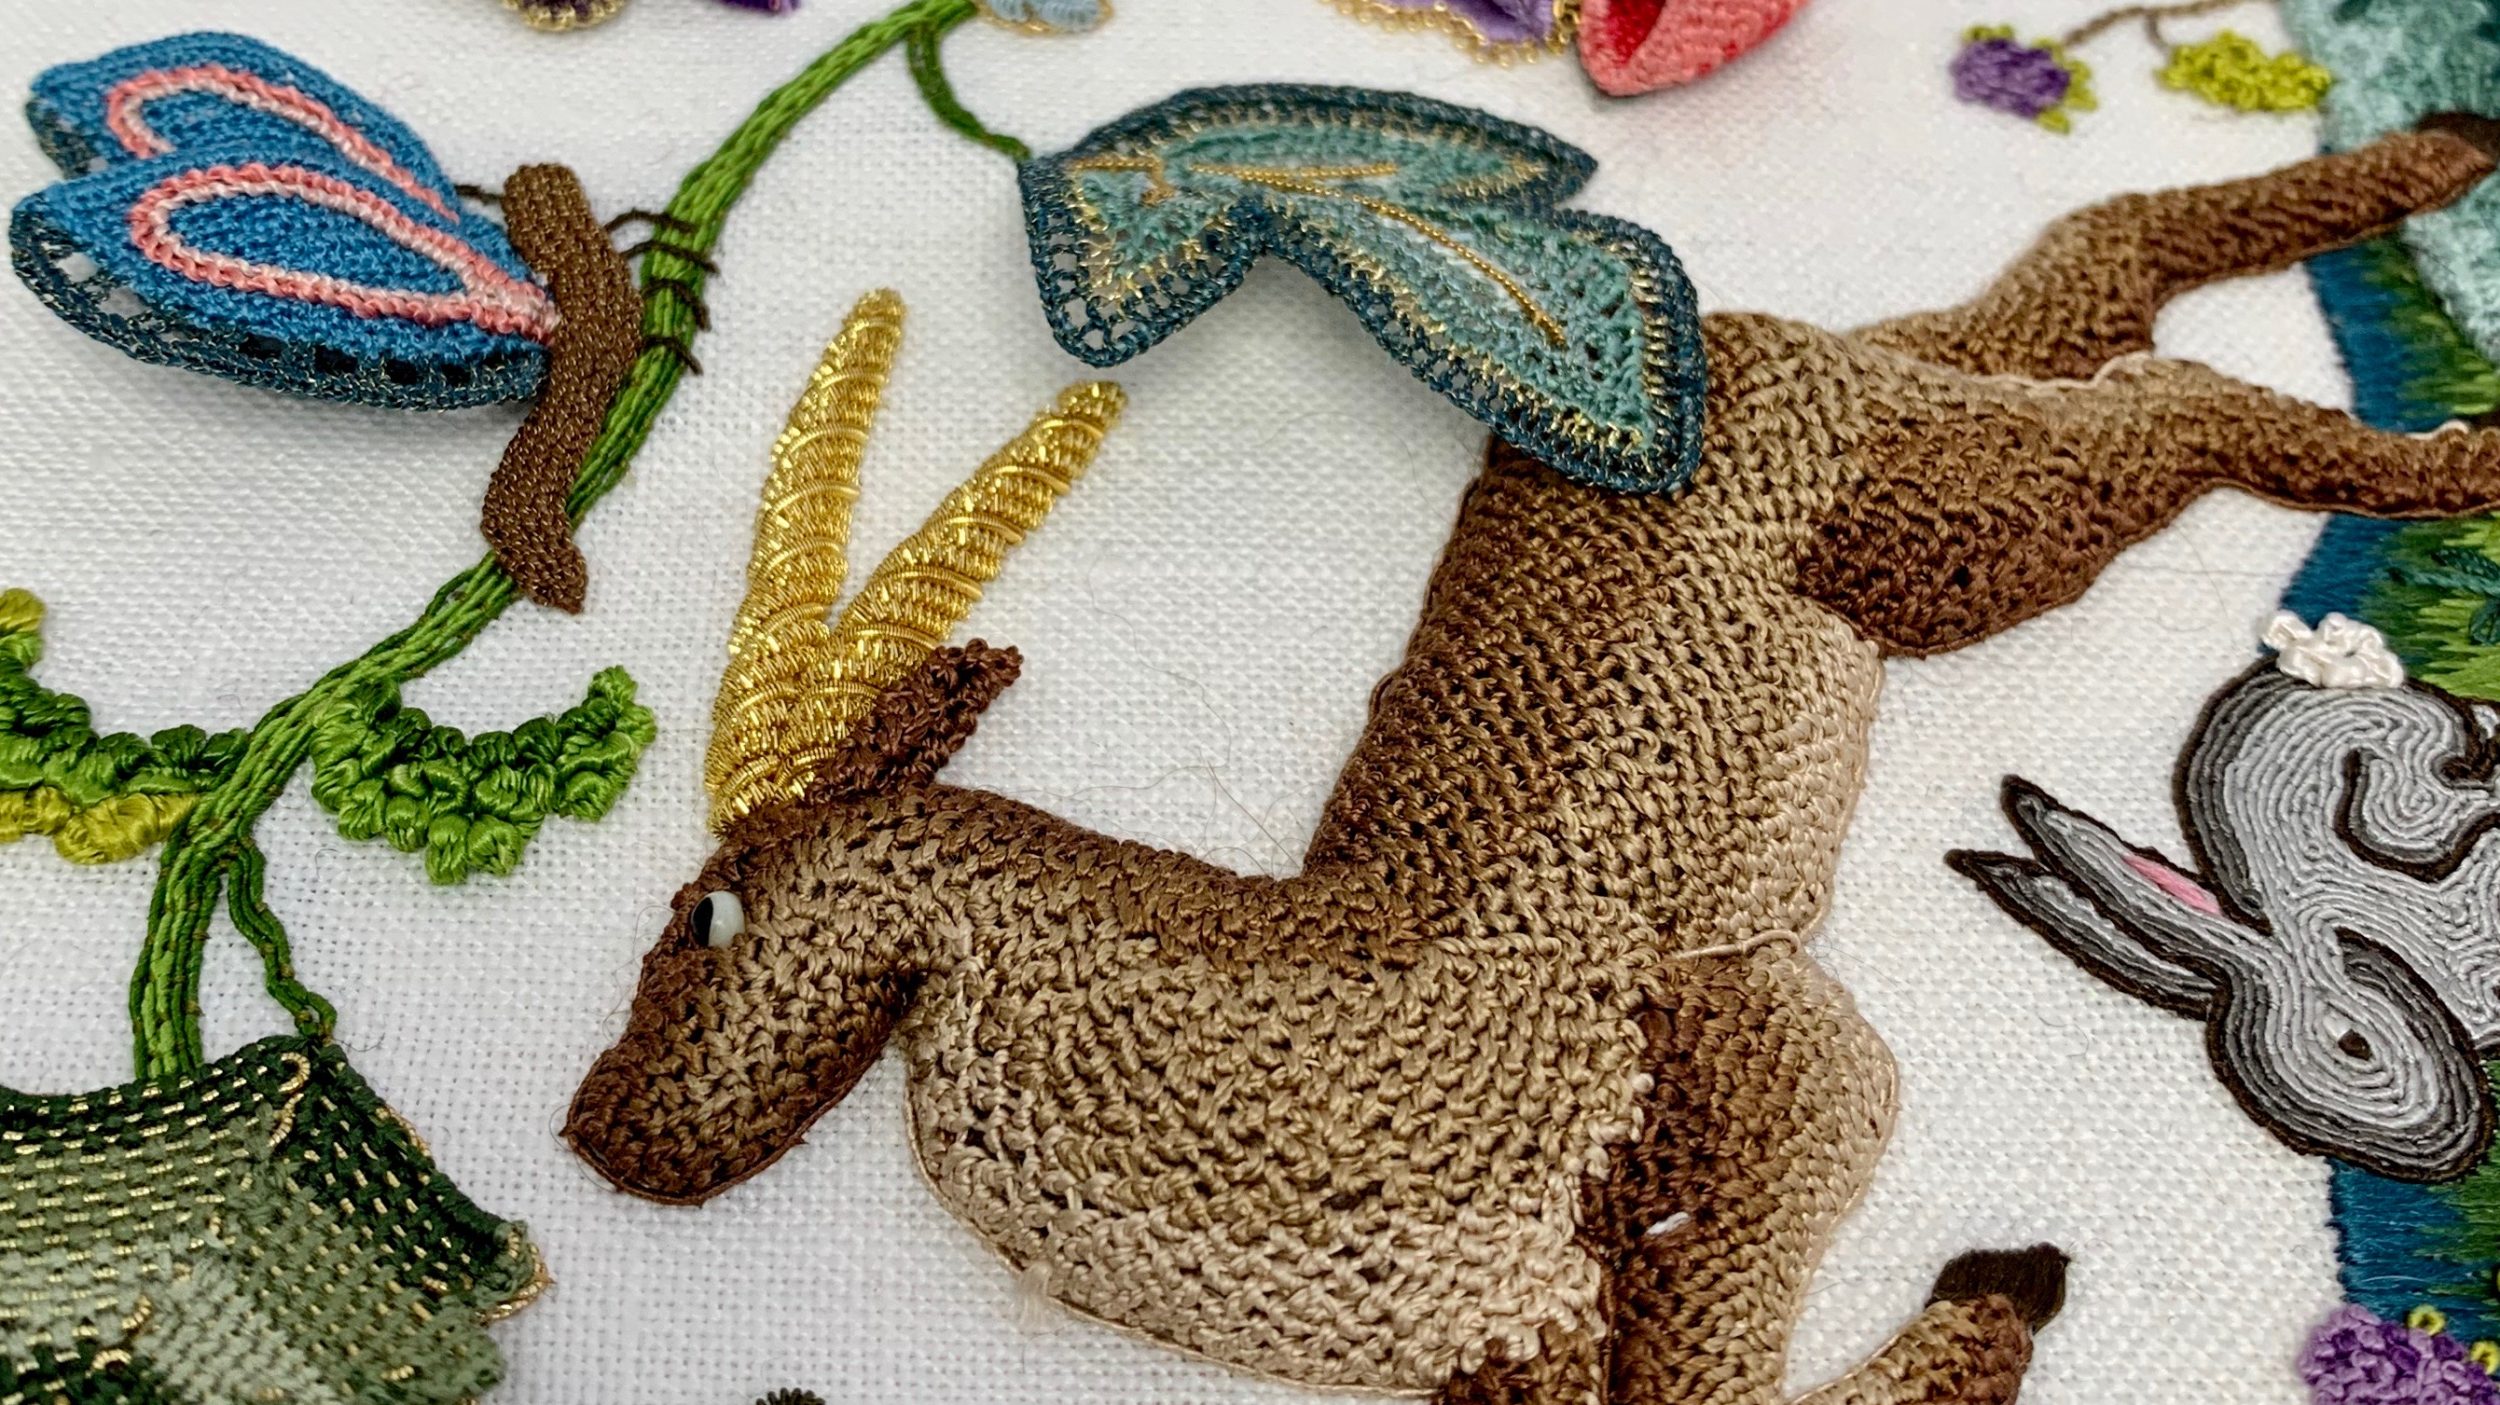 Embroidery by Kirsten Doogue